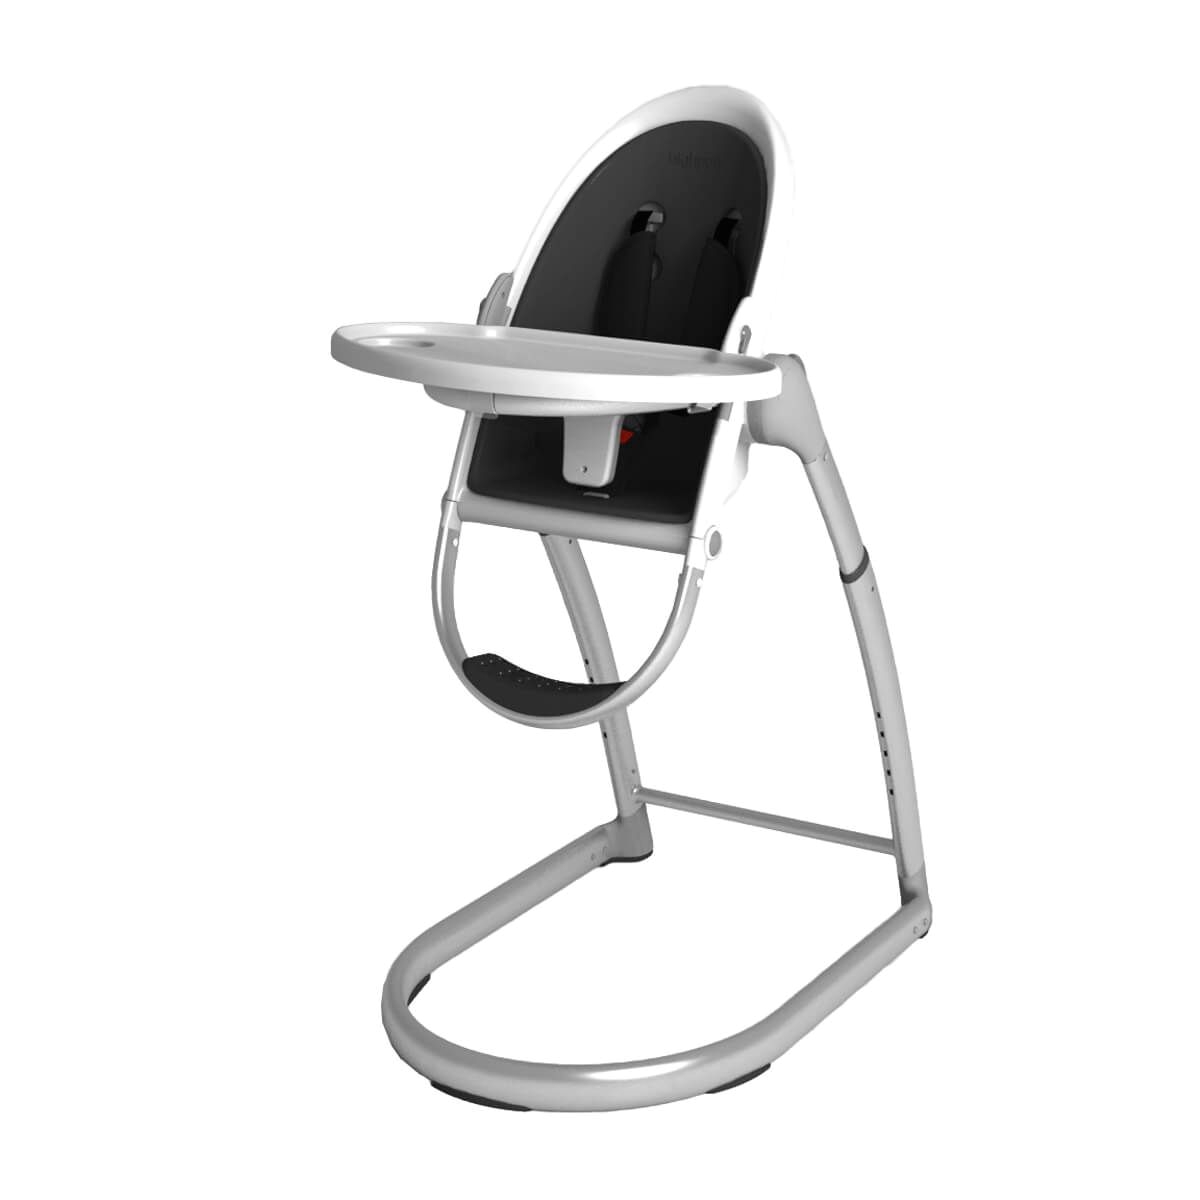 55 bar stool baby high chair modern home furniture check more at http